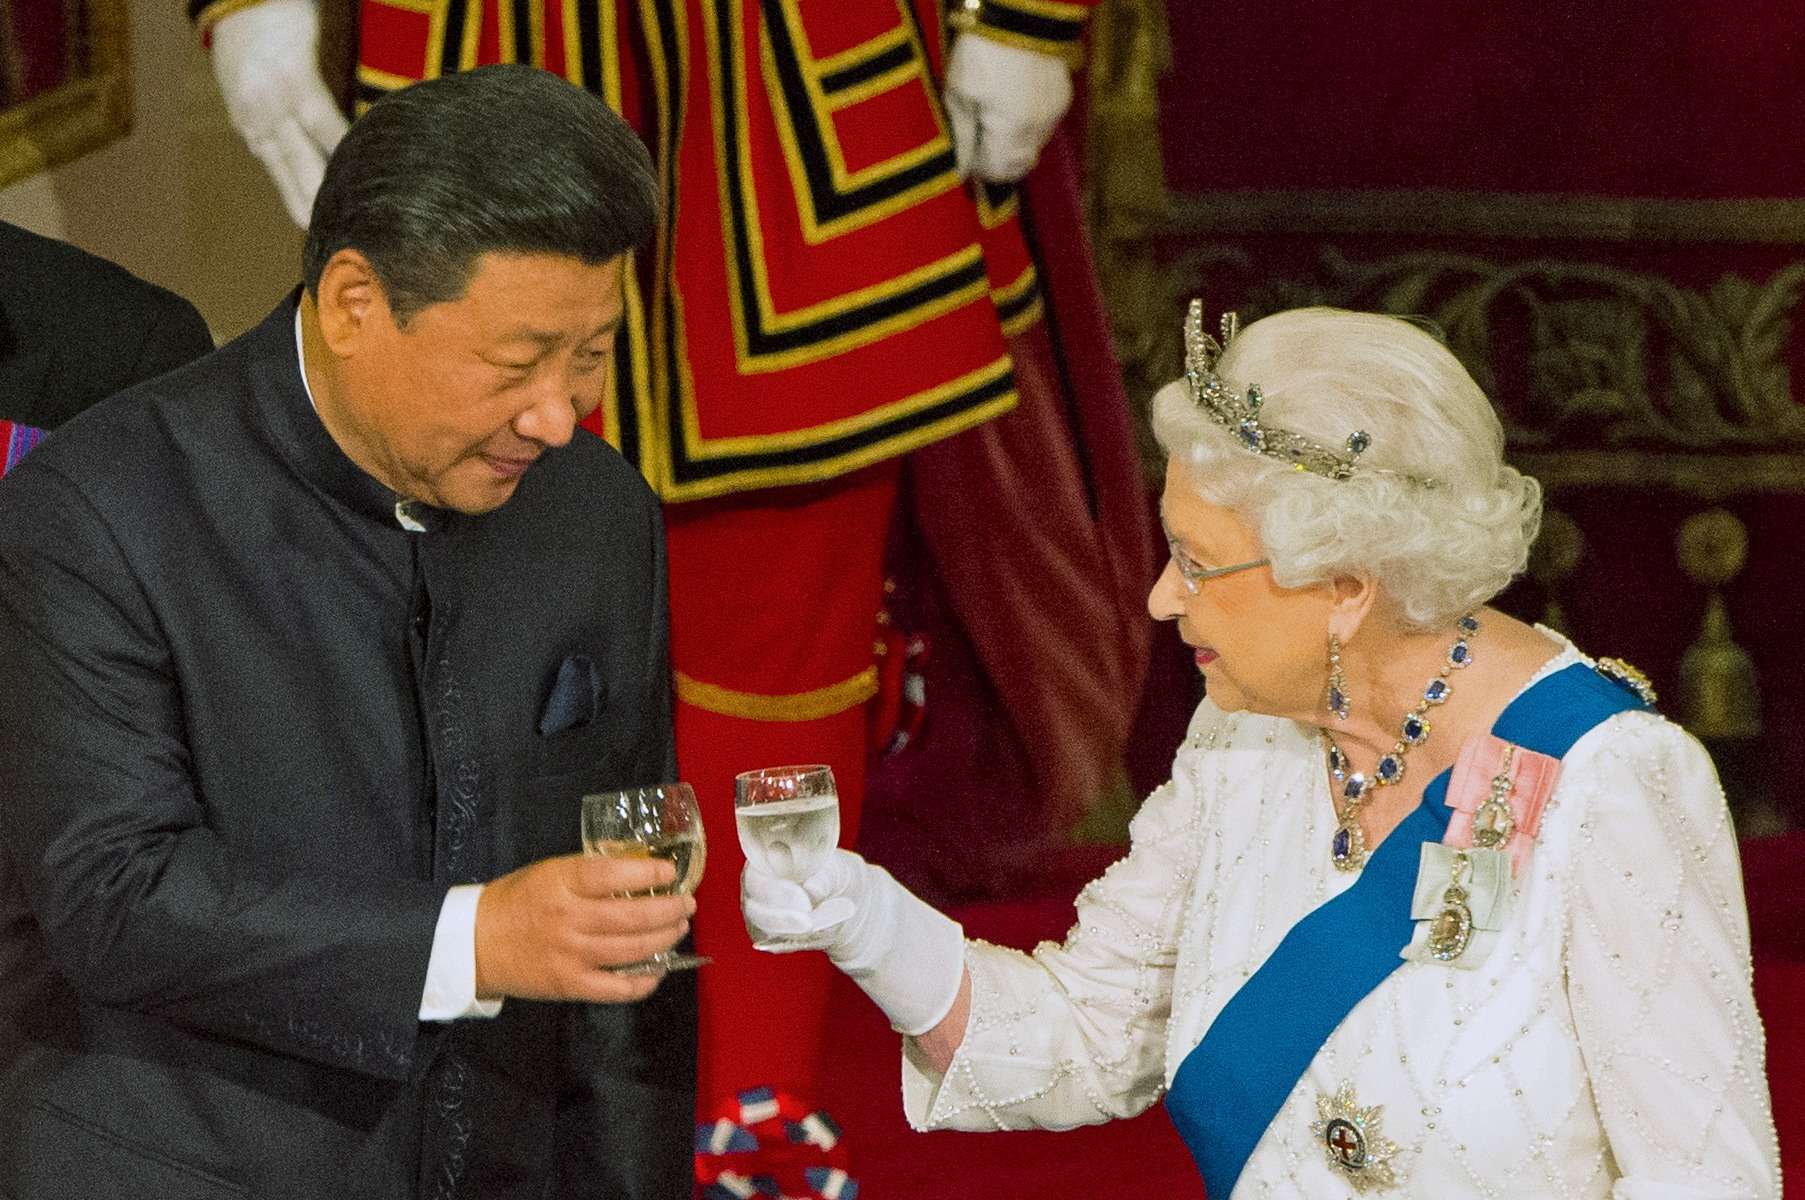 President Xi Jinping attends a state banquet at Buckingham Palace, London, hosted by Queen Elizabeth, during his state visit to Britain last year. Photo: Reuters